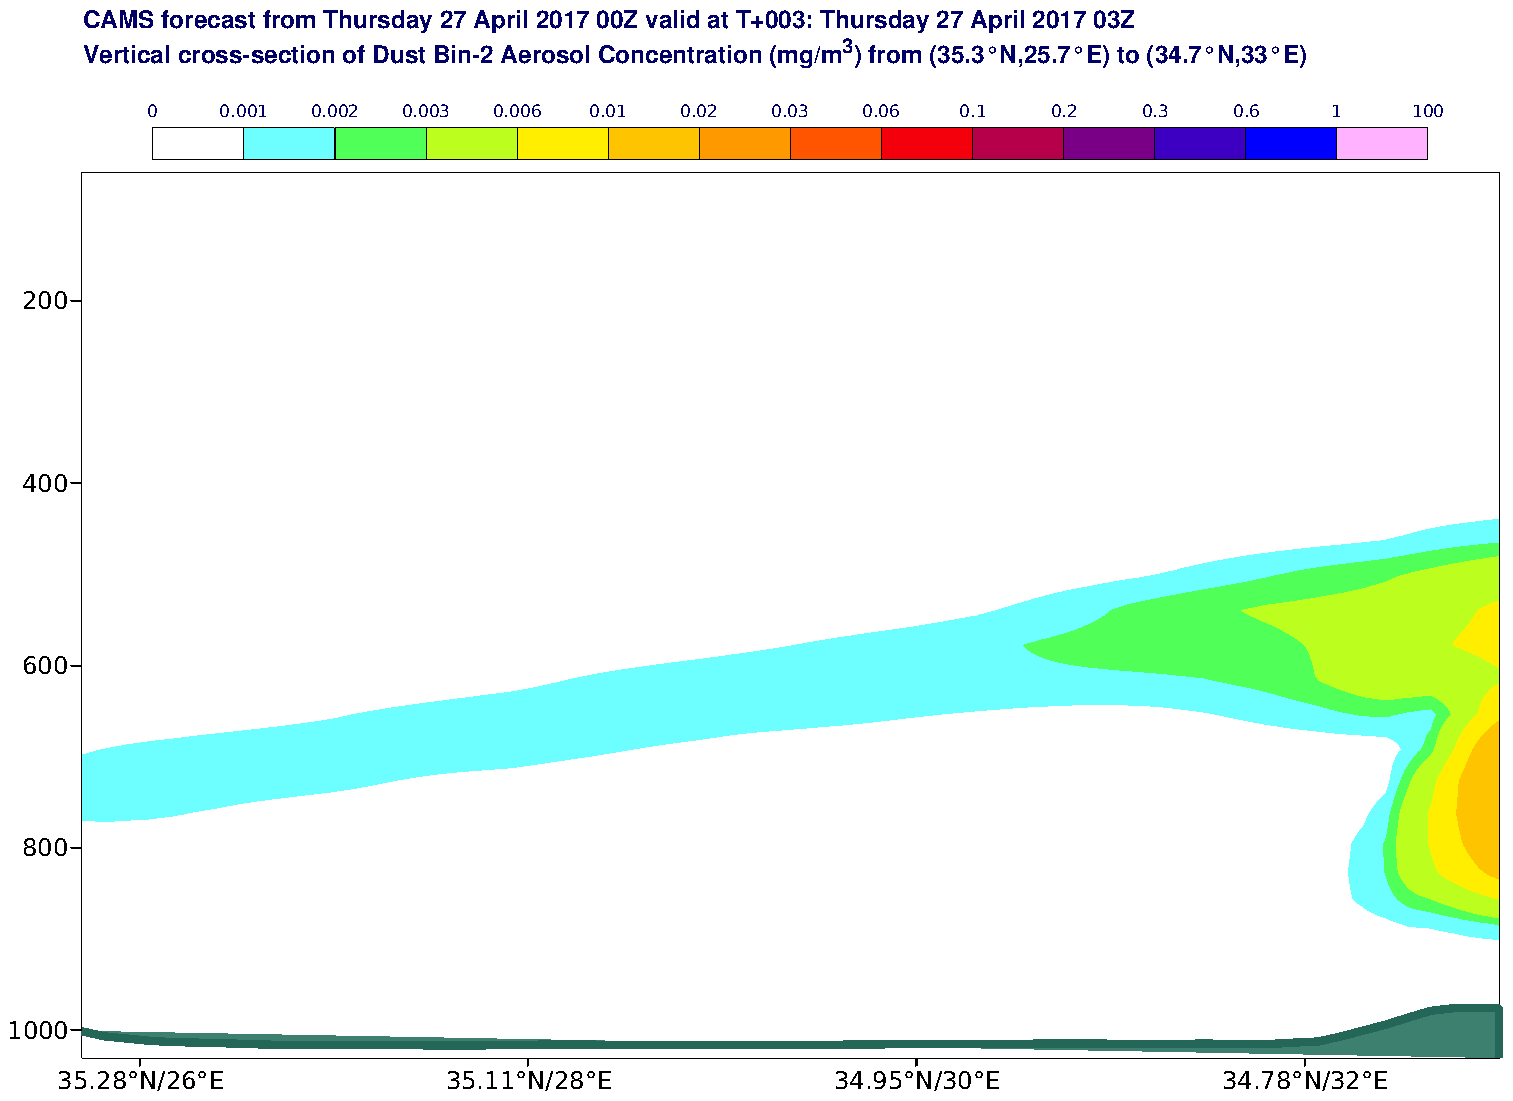 Vertical cross-section of Dust Bin-2 Aerosol Concentration (mg/m3) valid at T3 - 2017-04-27 03:00